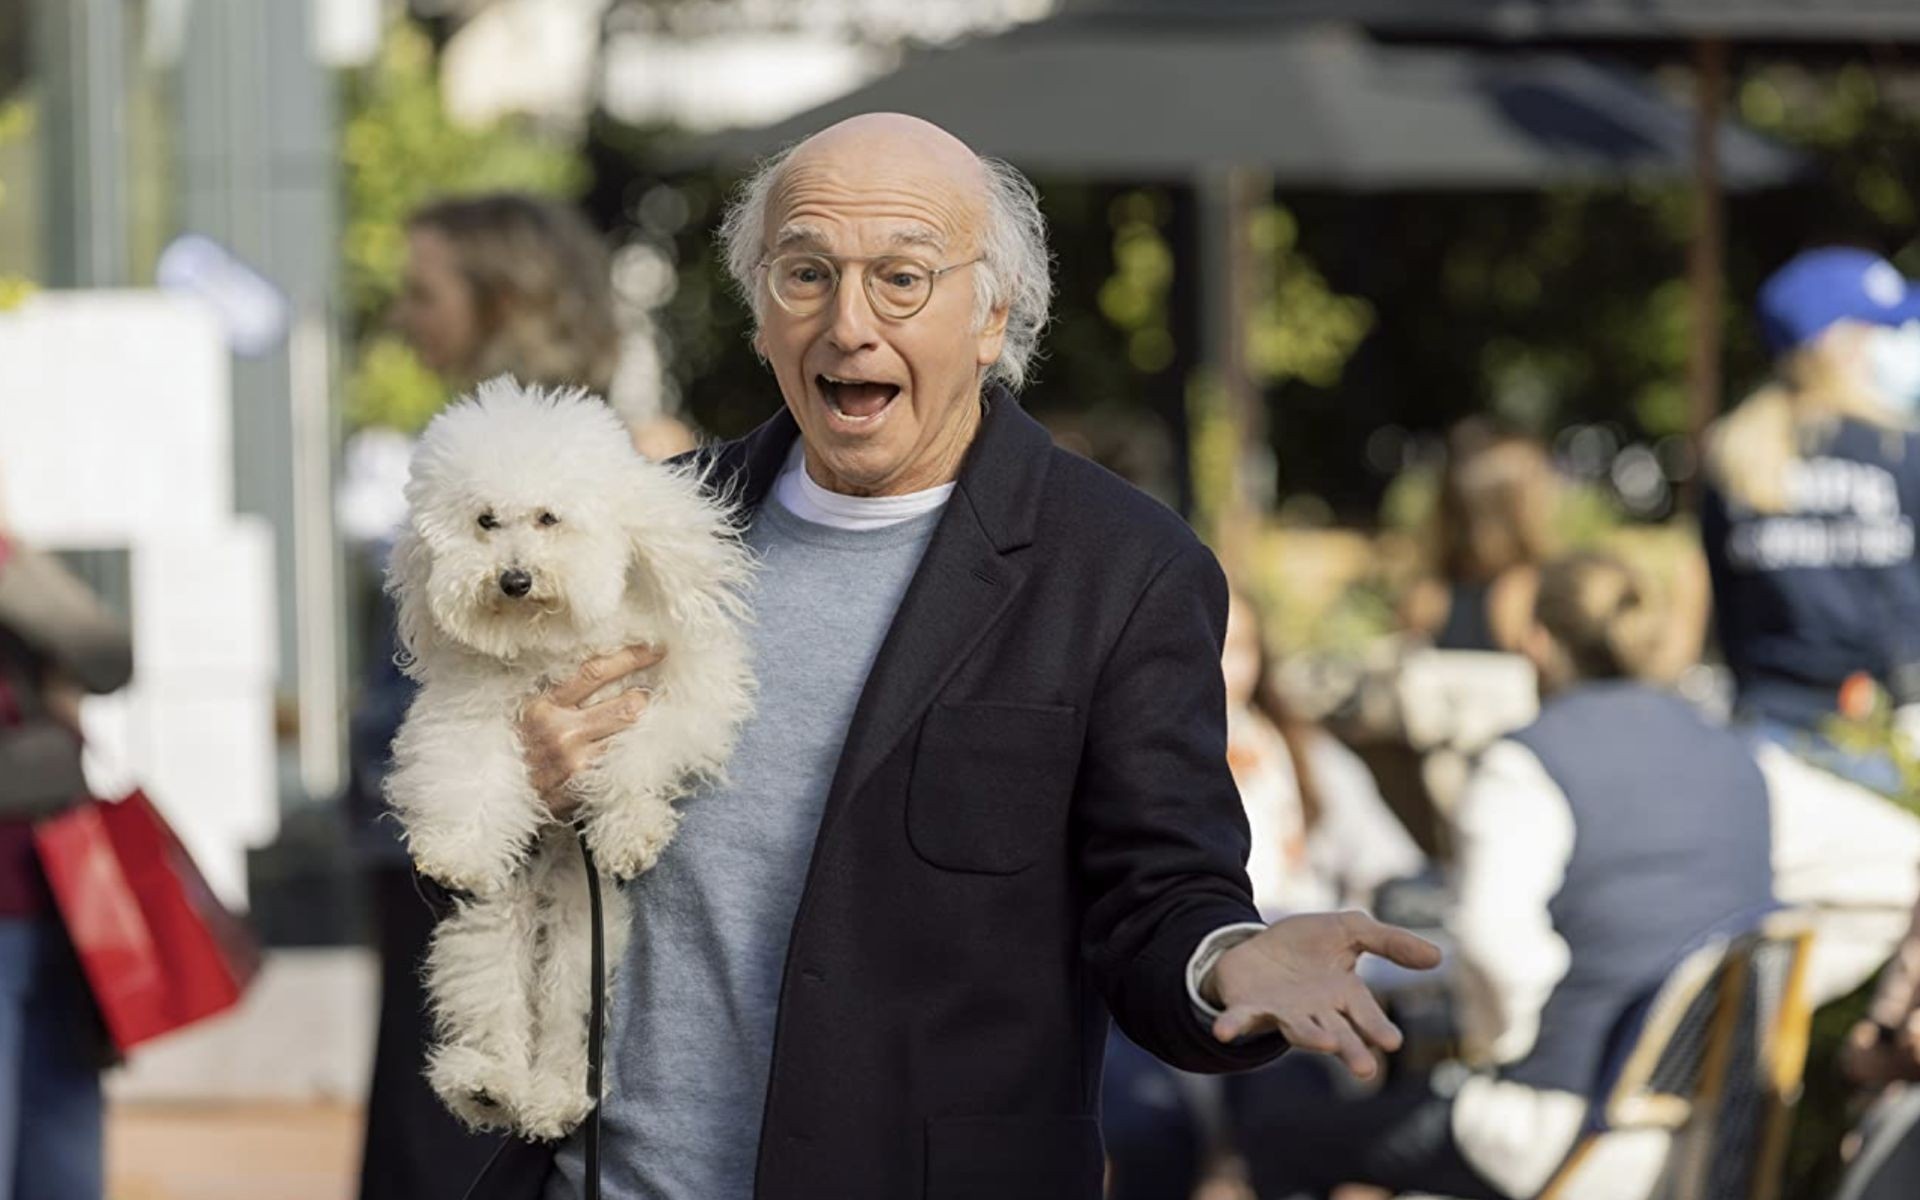 Curb Your Enthusiasm' Season 11 full cast list: Larry David, Jeff Garlin return with new guest appearances in HBO series 1920x1200